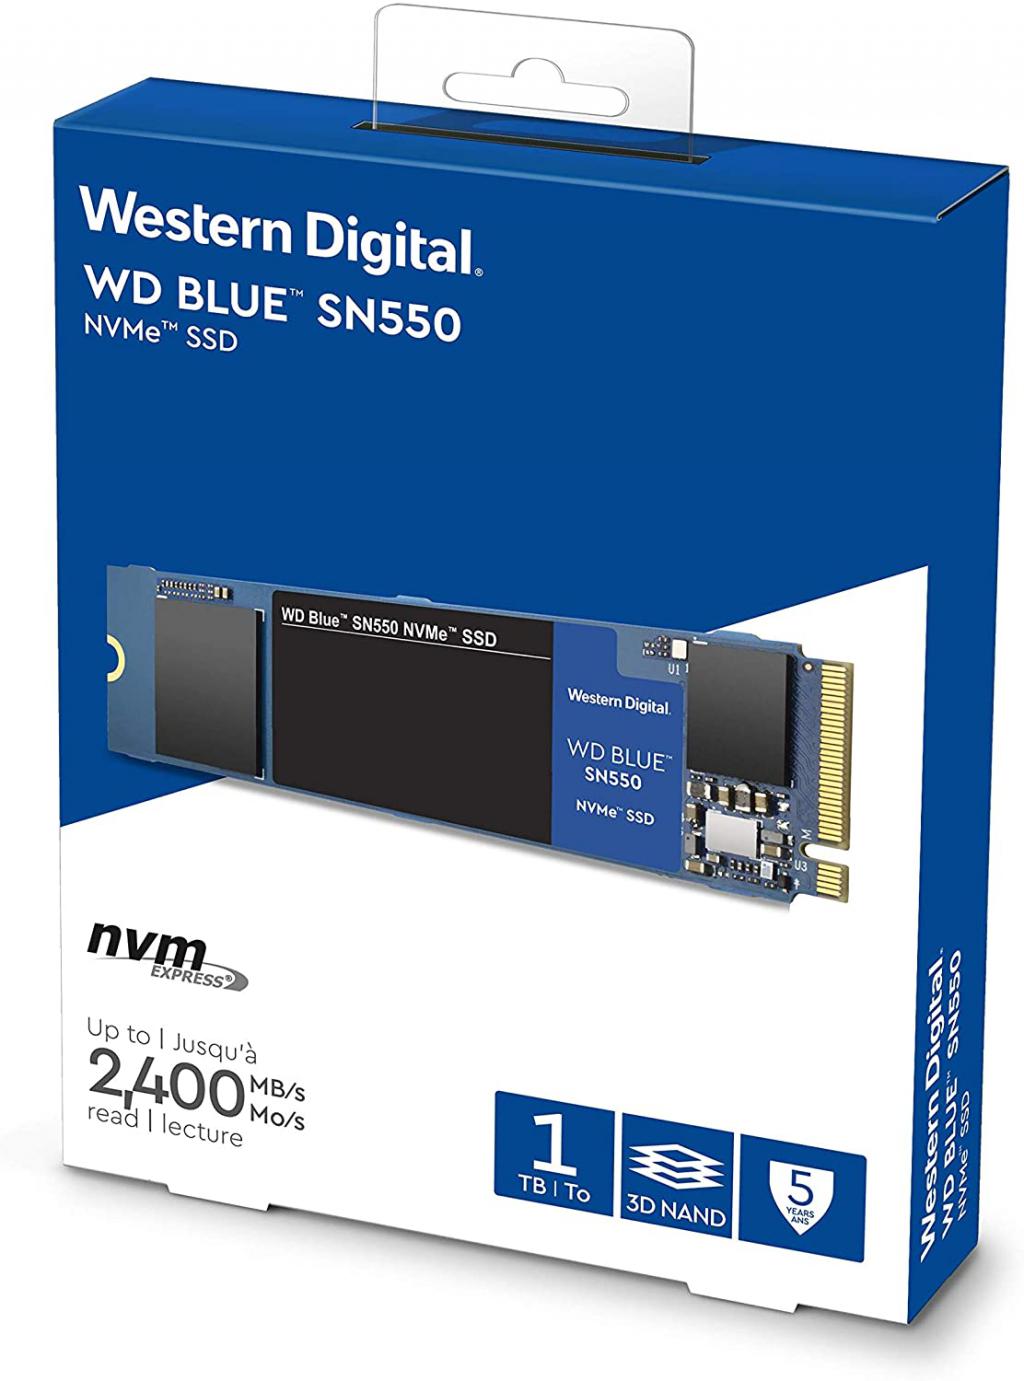 DISQUE DUR WD BLUE SSD 1To